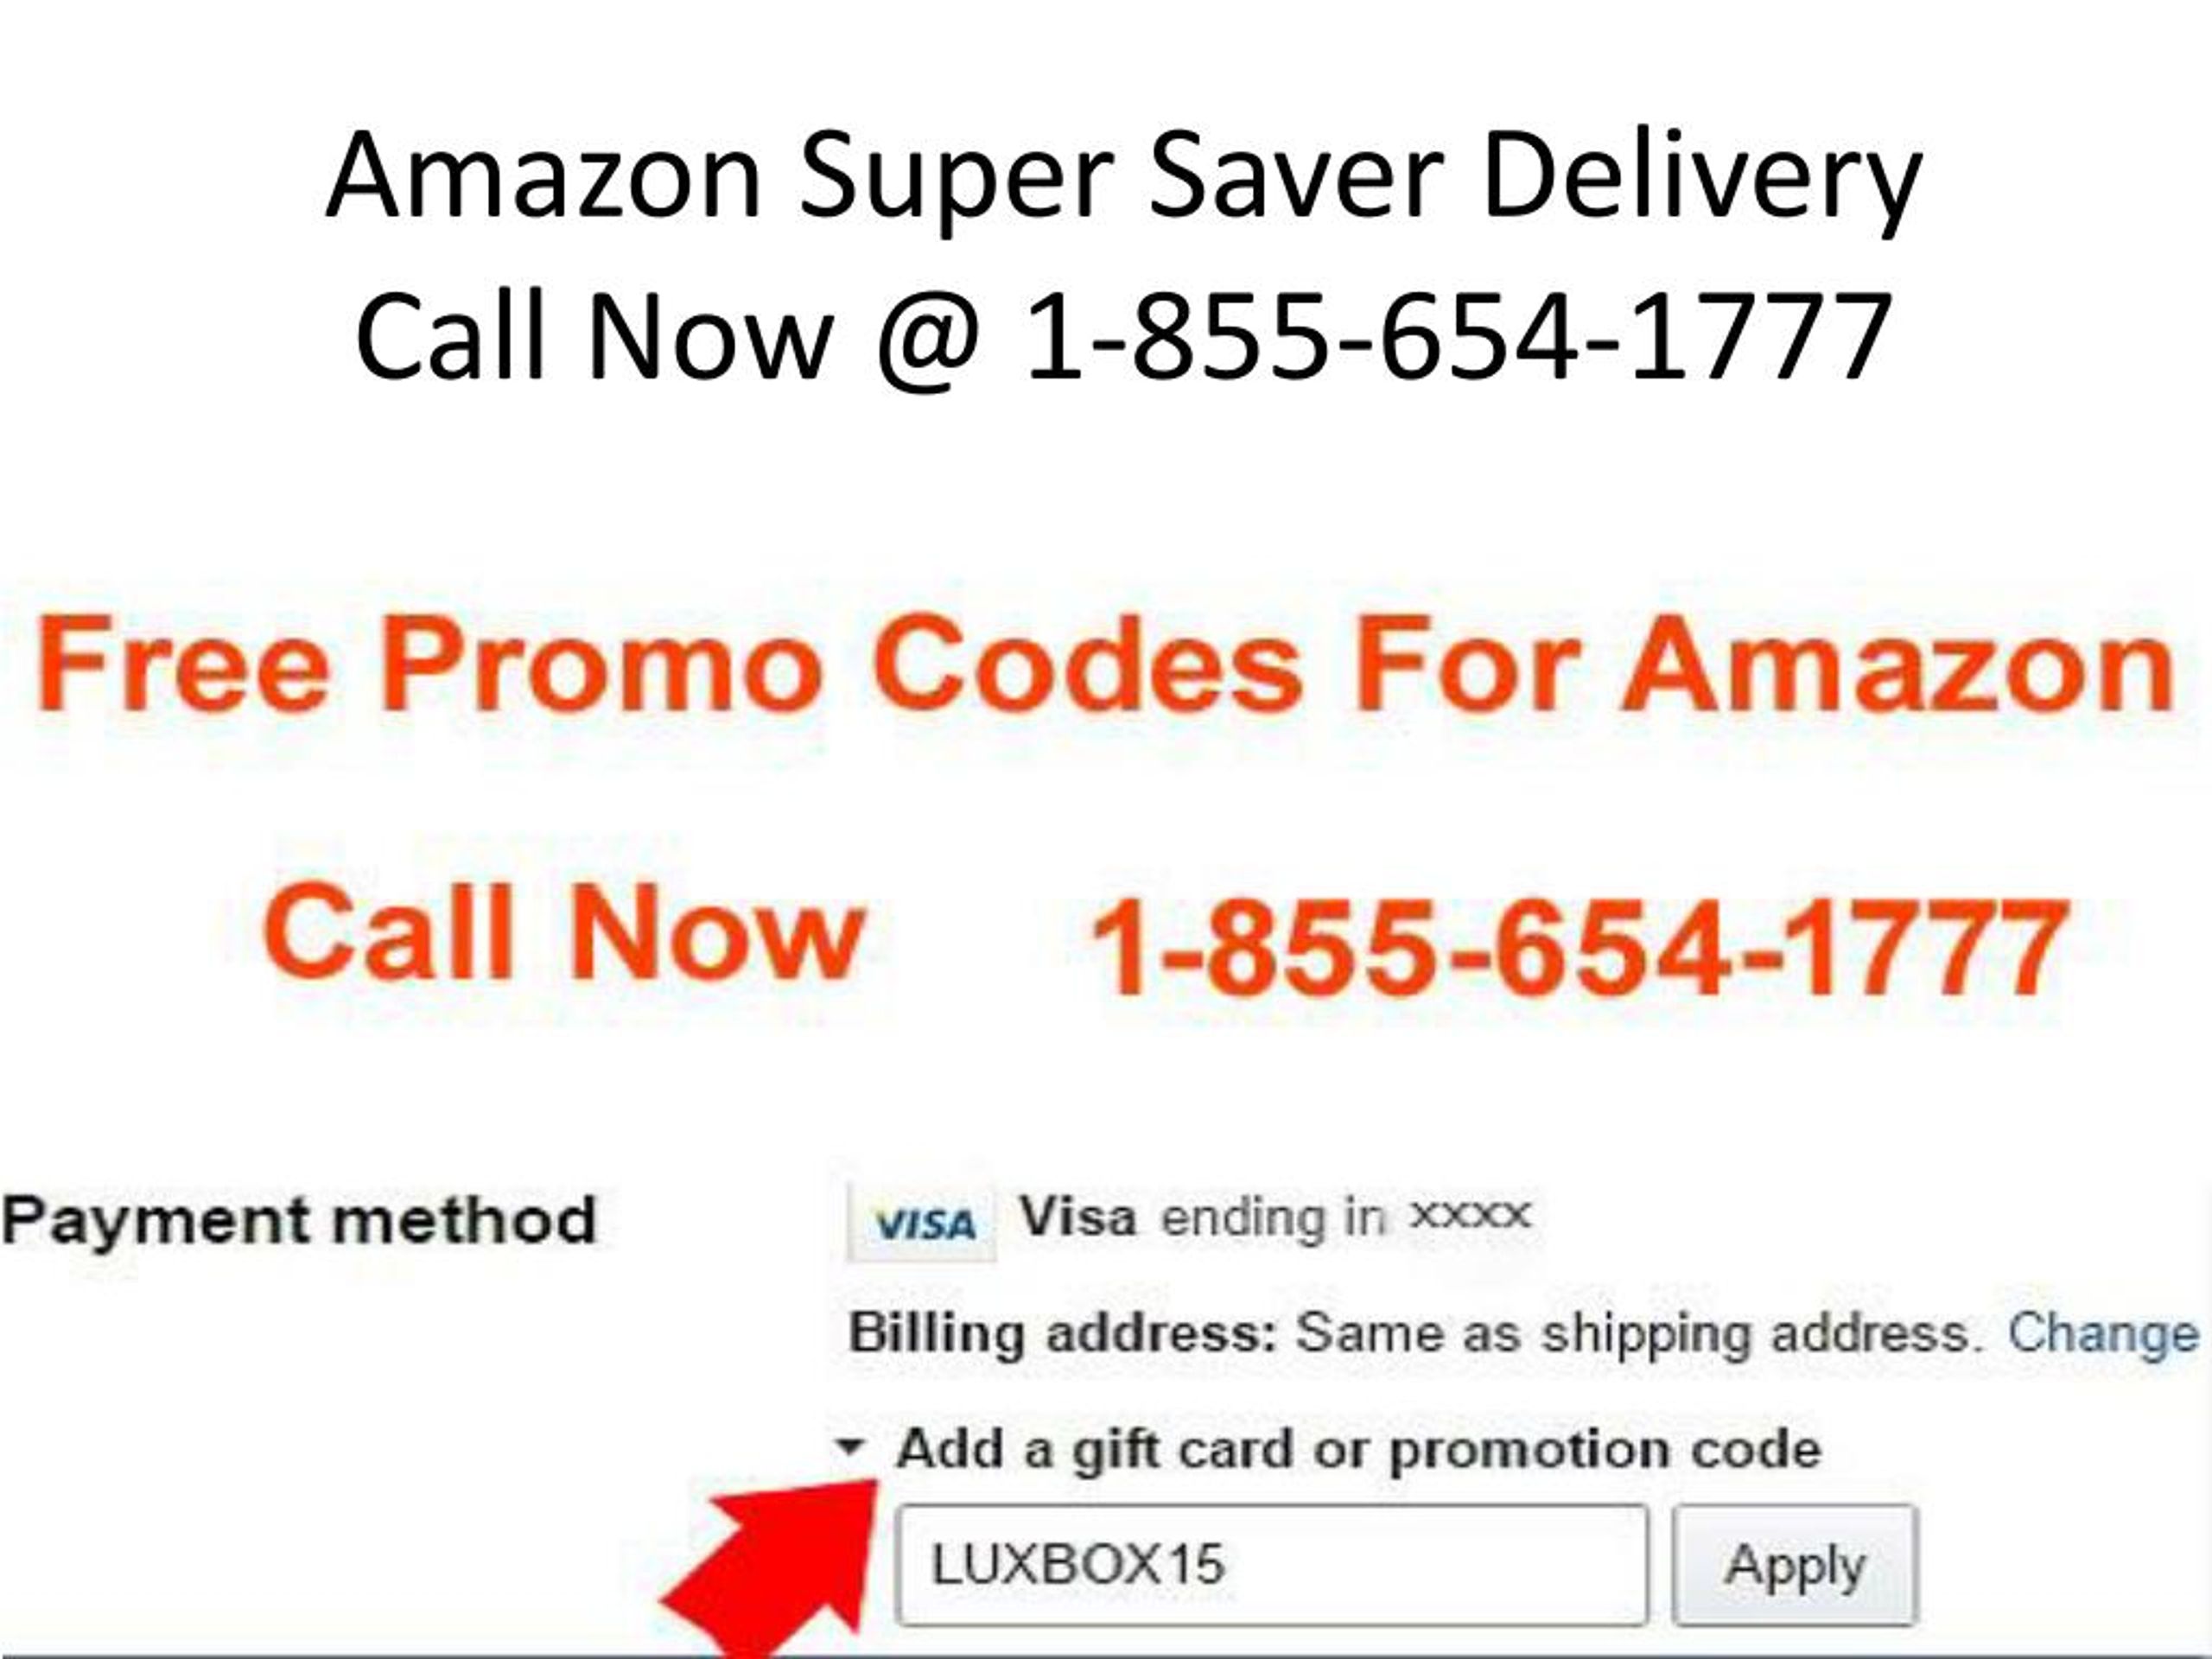 https://image4.slideserve.com/8013432/a-mazon-super-saver-delivery-call-now-@-1-855-654-1777-l.jpg